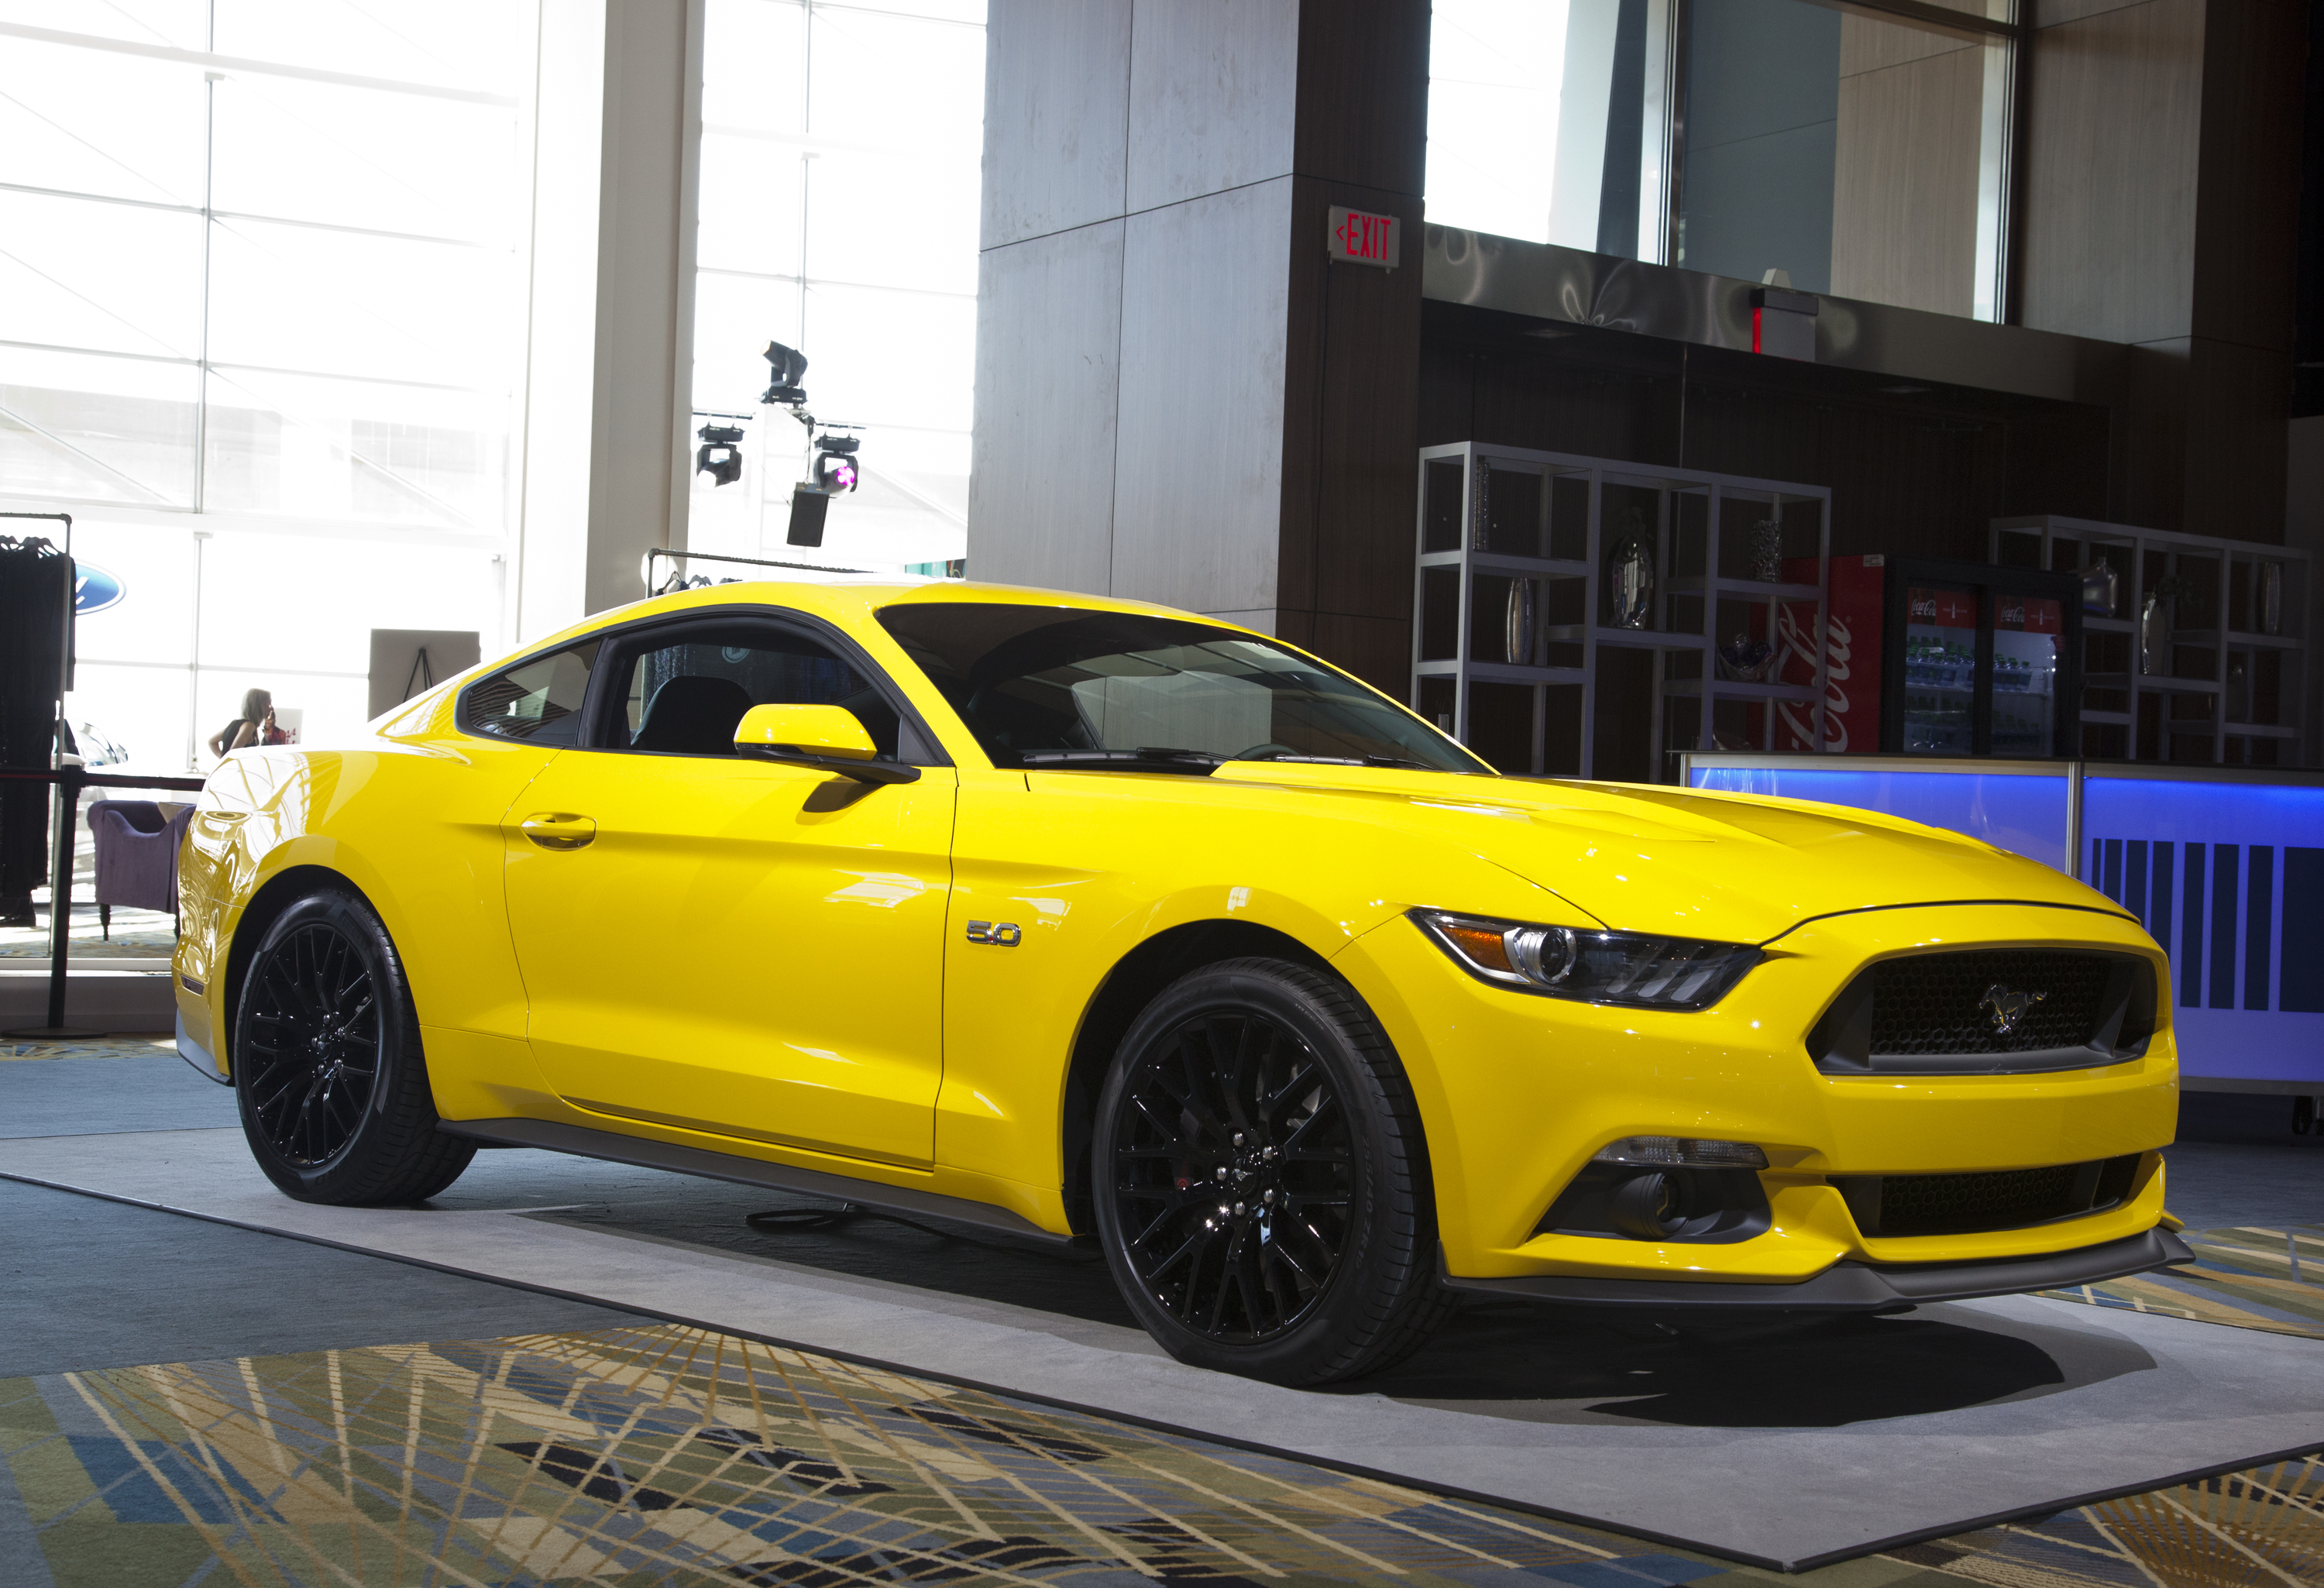 2017 Ford® Mustang Sports Car | Models & Specs | Ford.com